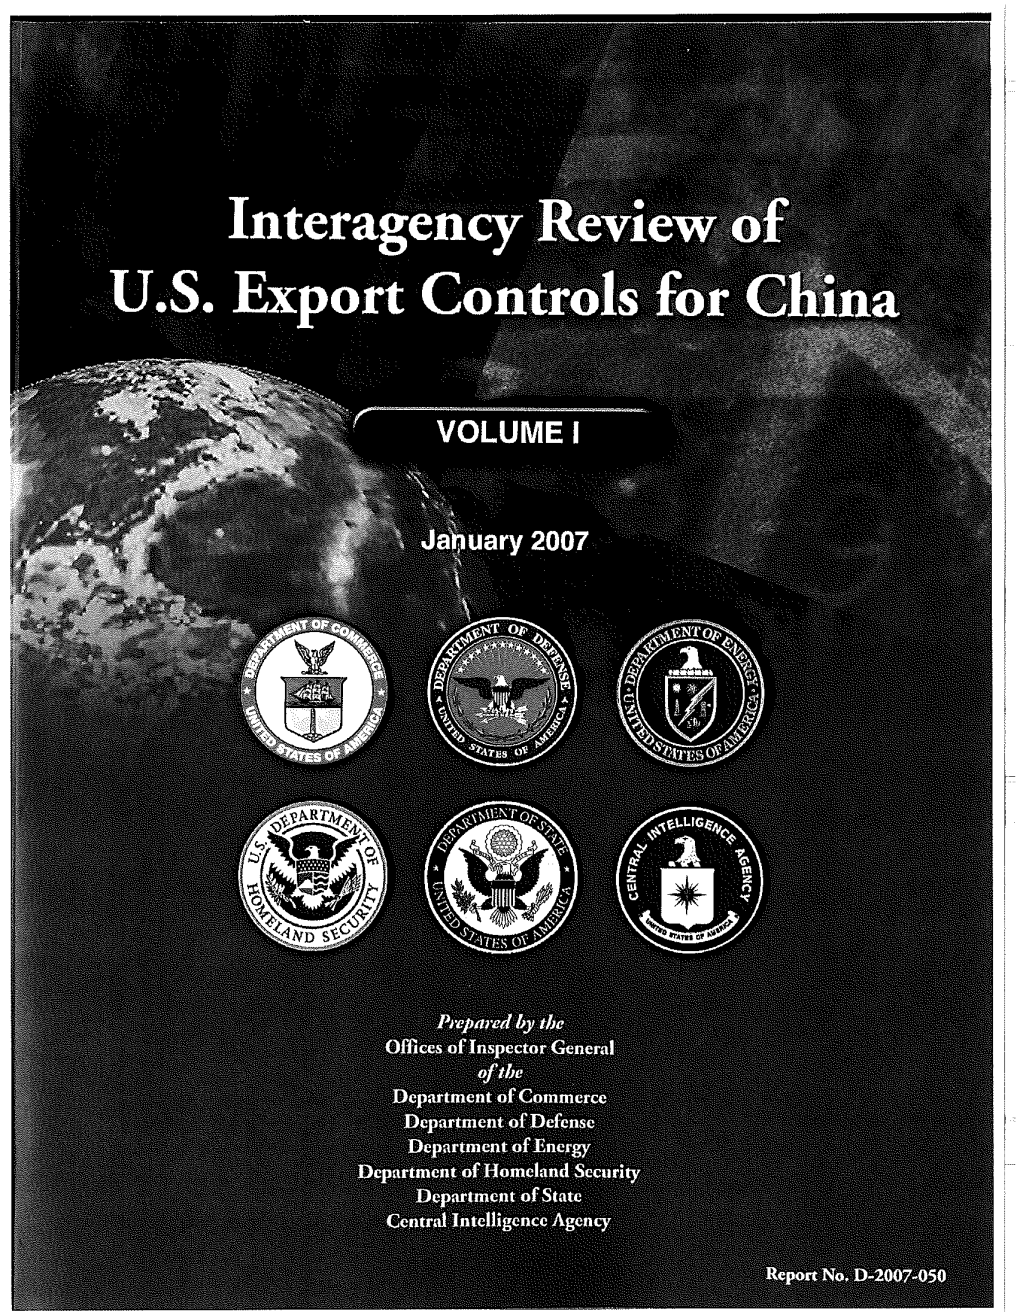 Interagency Review of U.S. Export Controls for China